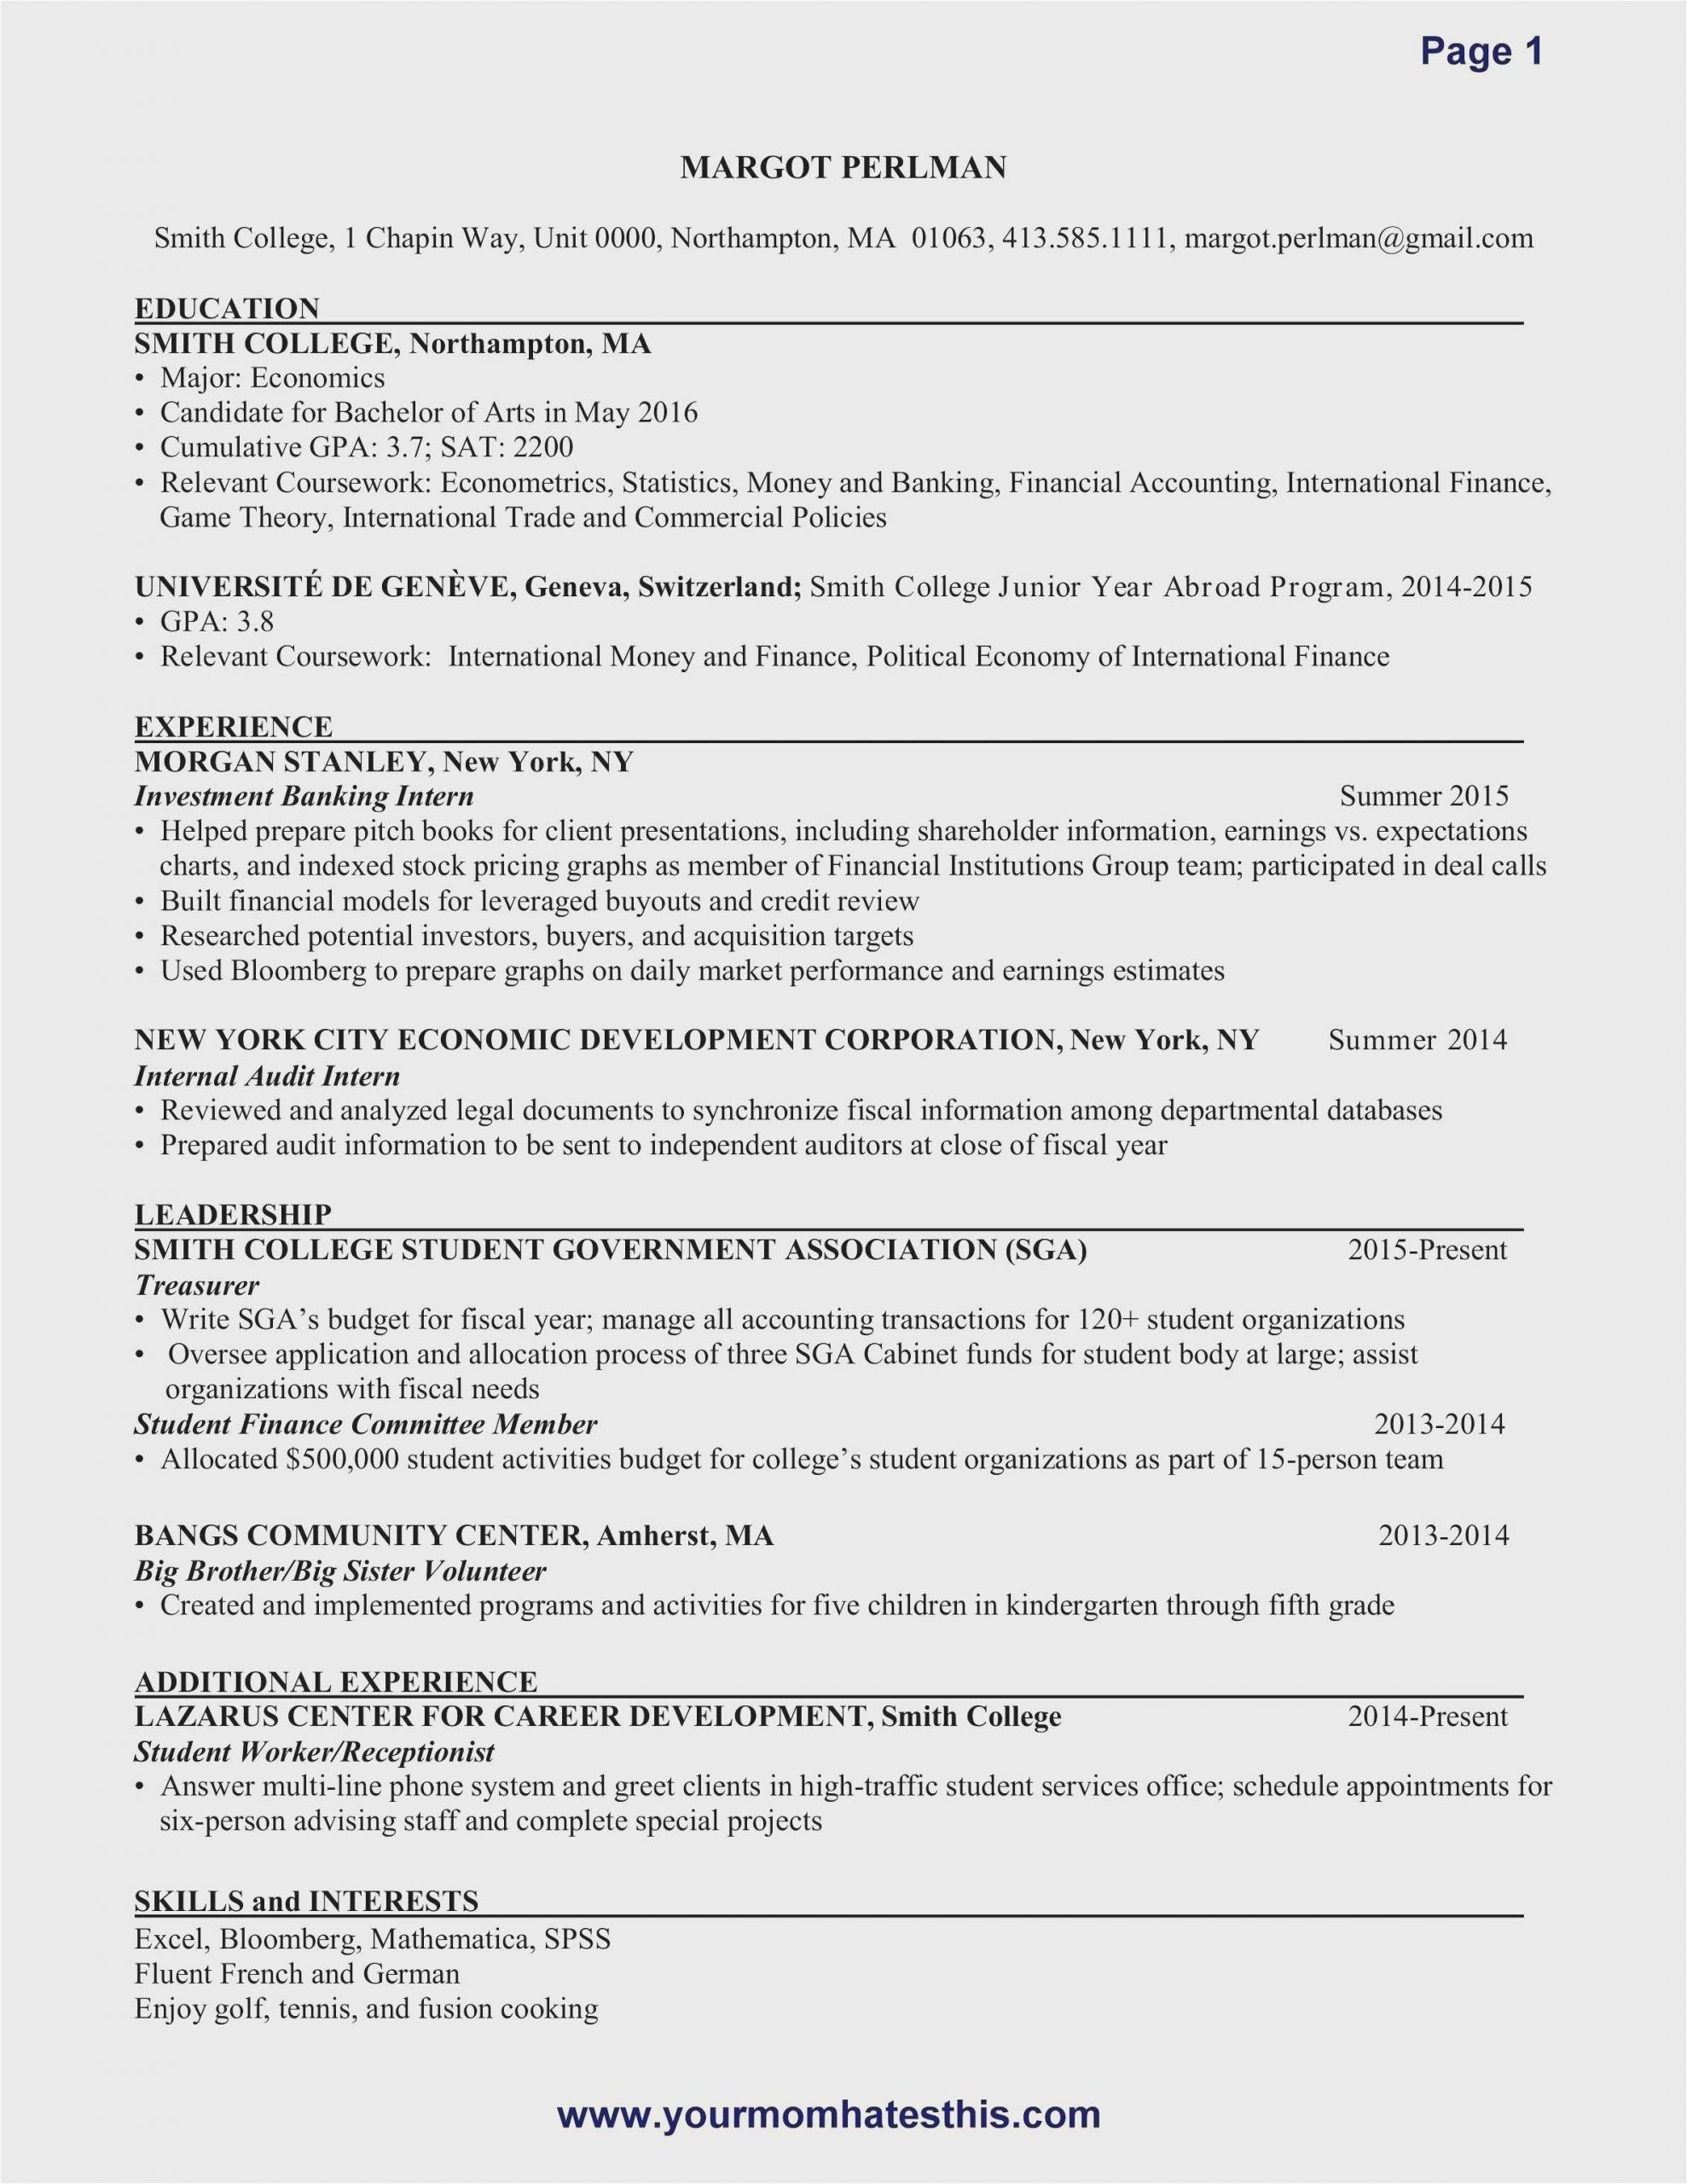 Free Entry Level Resume Templates Download Free Download 59 Resume for Entry Level Examples